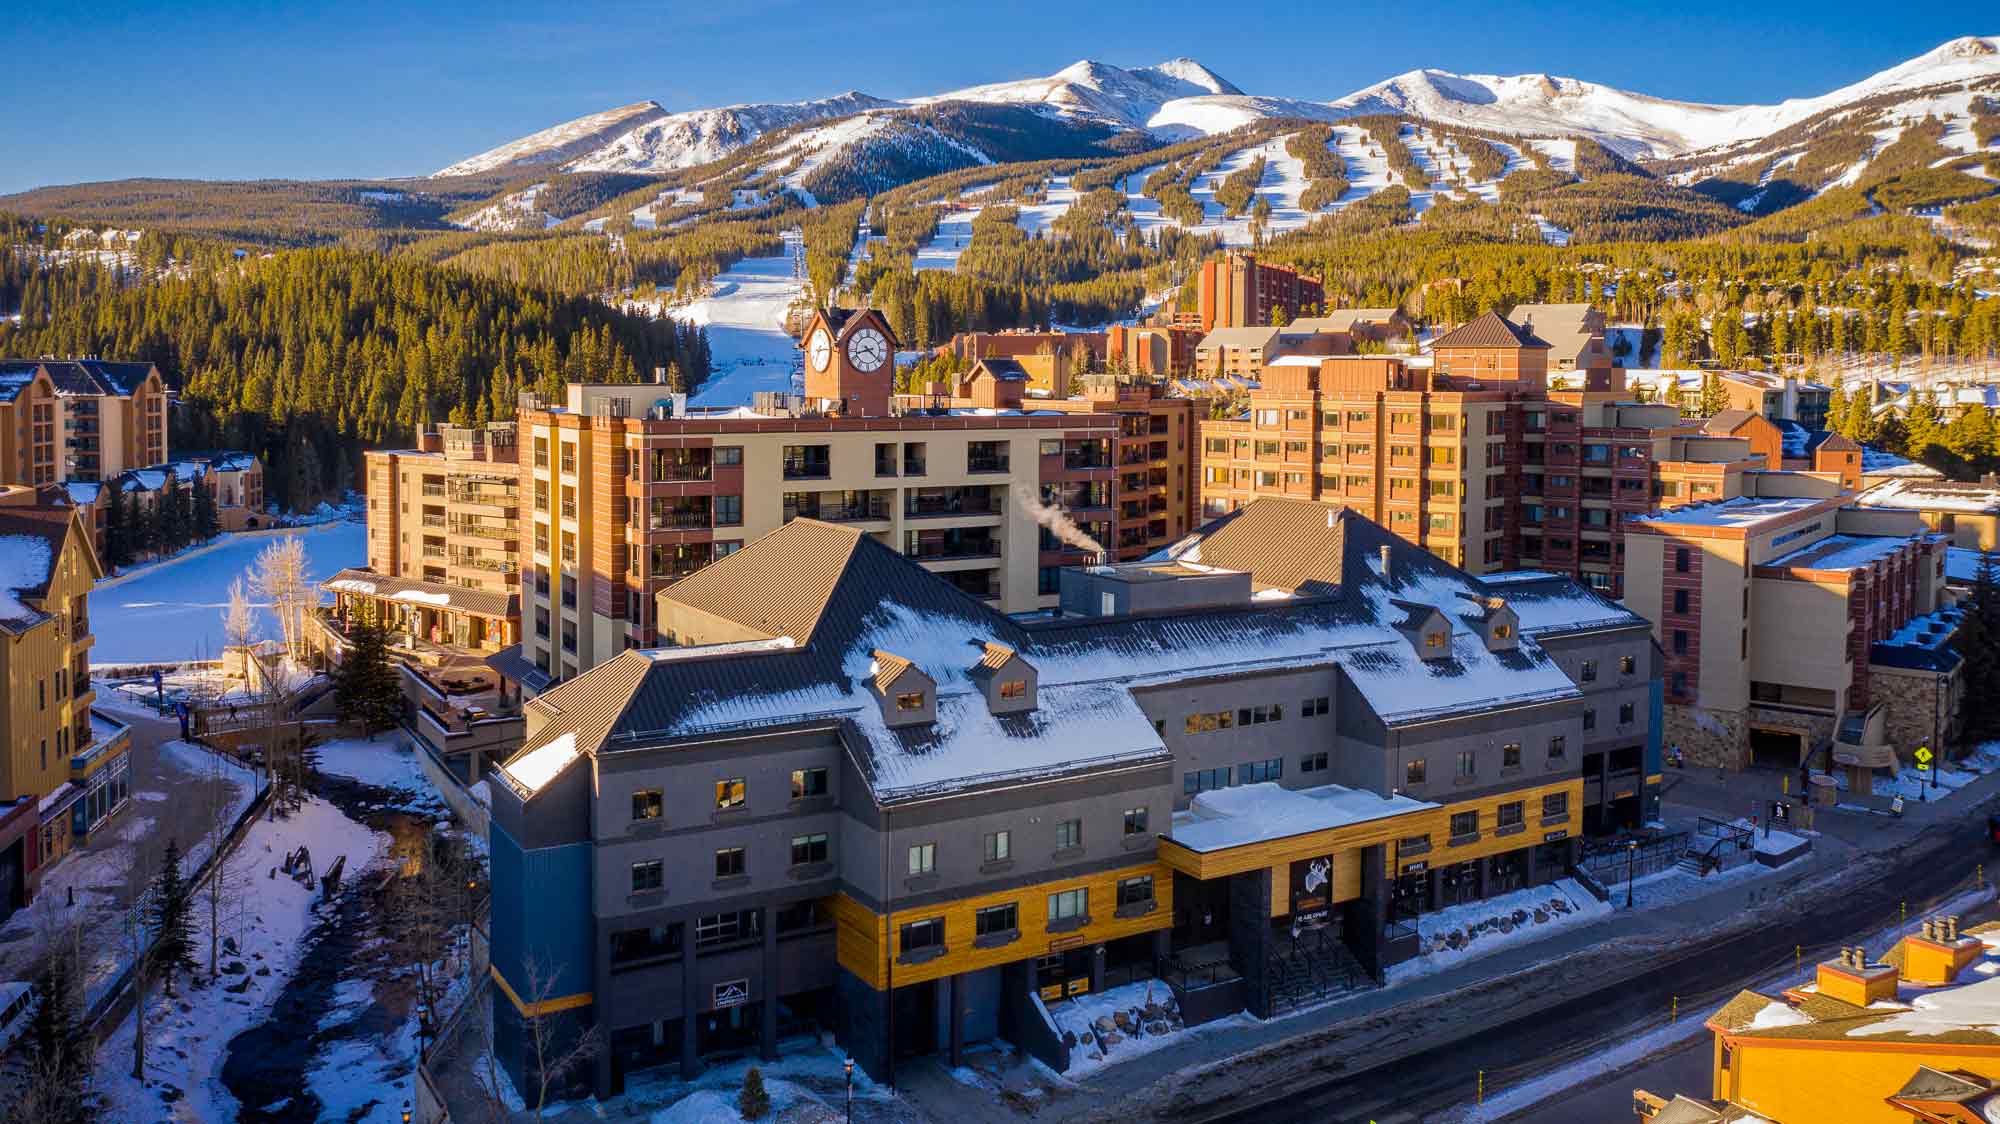 Gravity Haus Breck winter aerial with Breck ski slopes